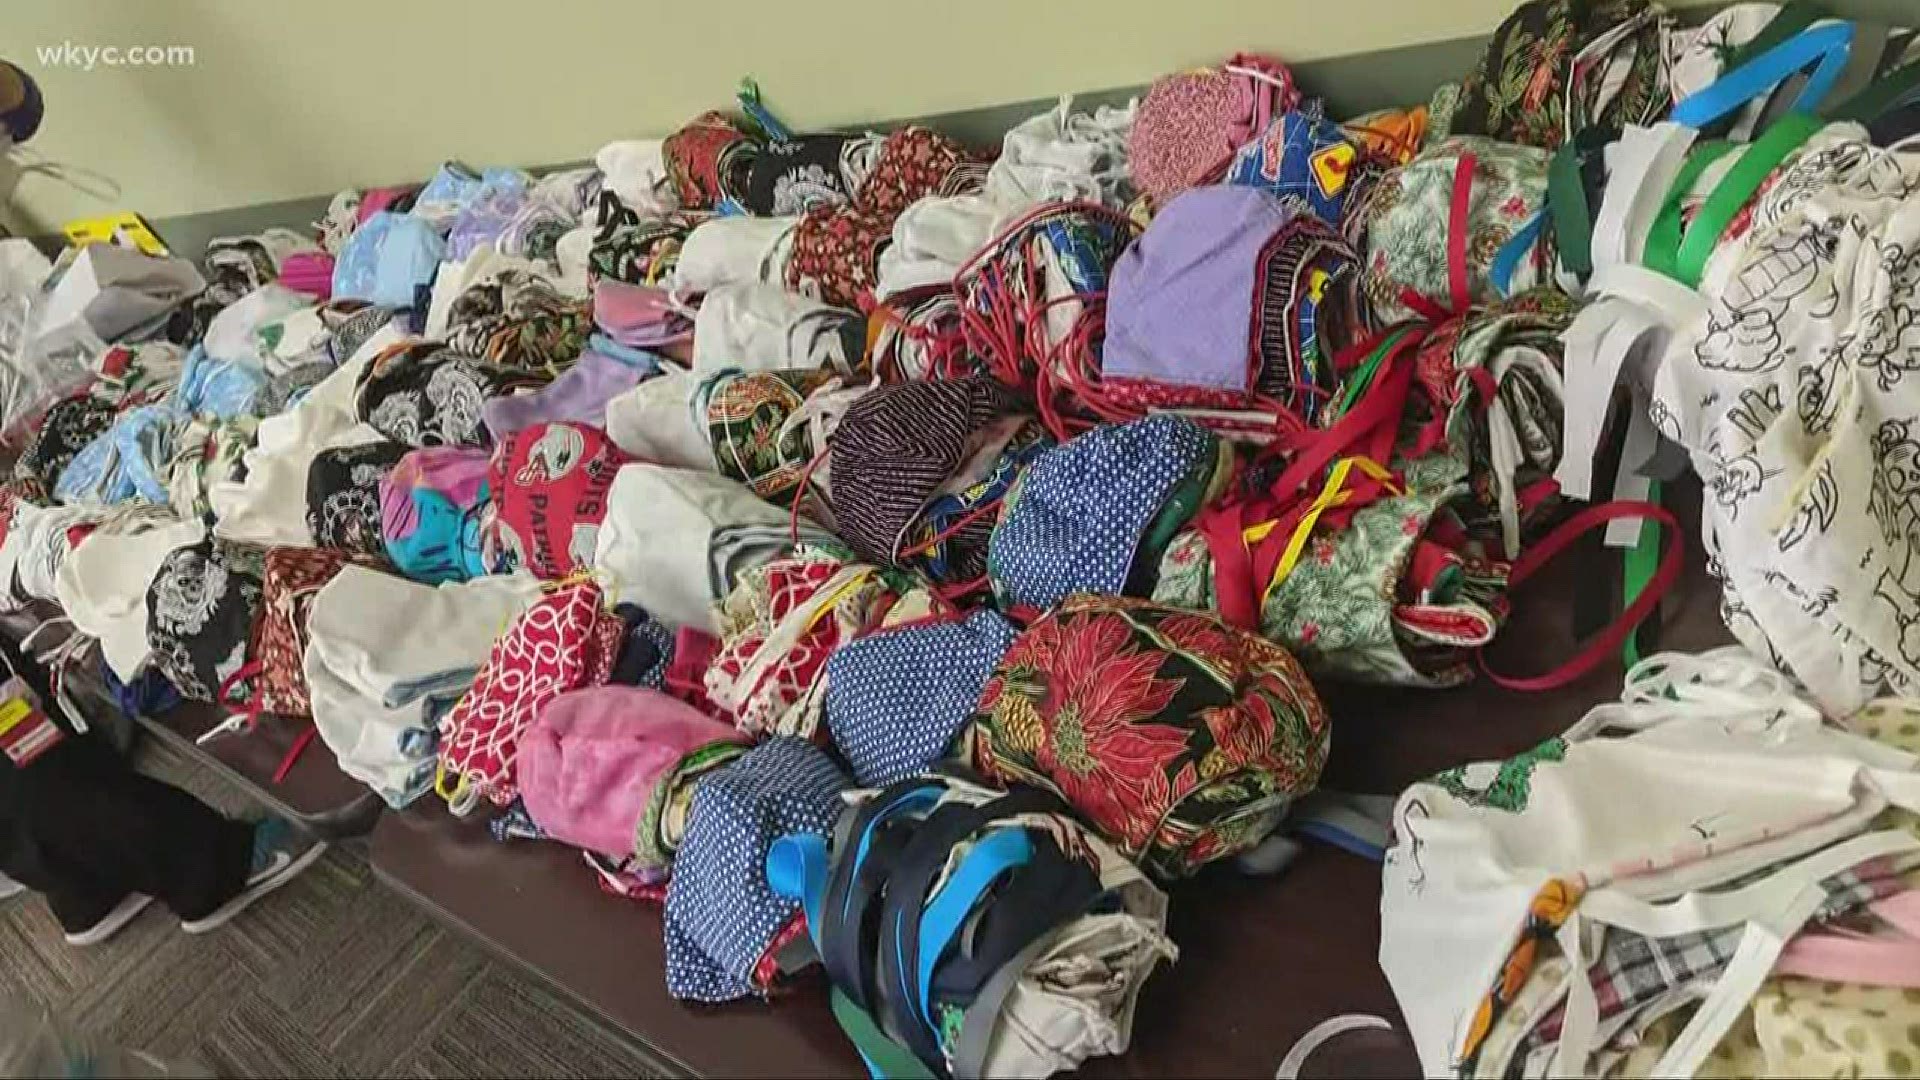 University Hospitals has a goal to make 100,000 cloth masks for its employees over a period of two weeks.But they need your help. Brandon Simmons explains